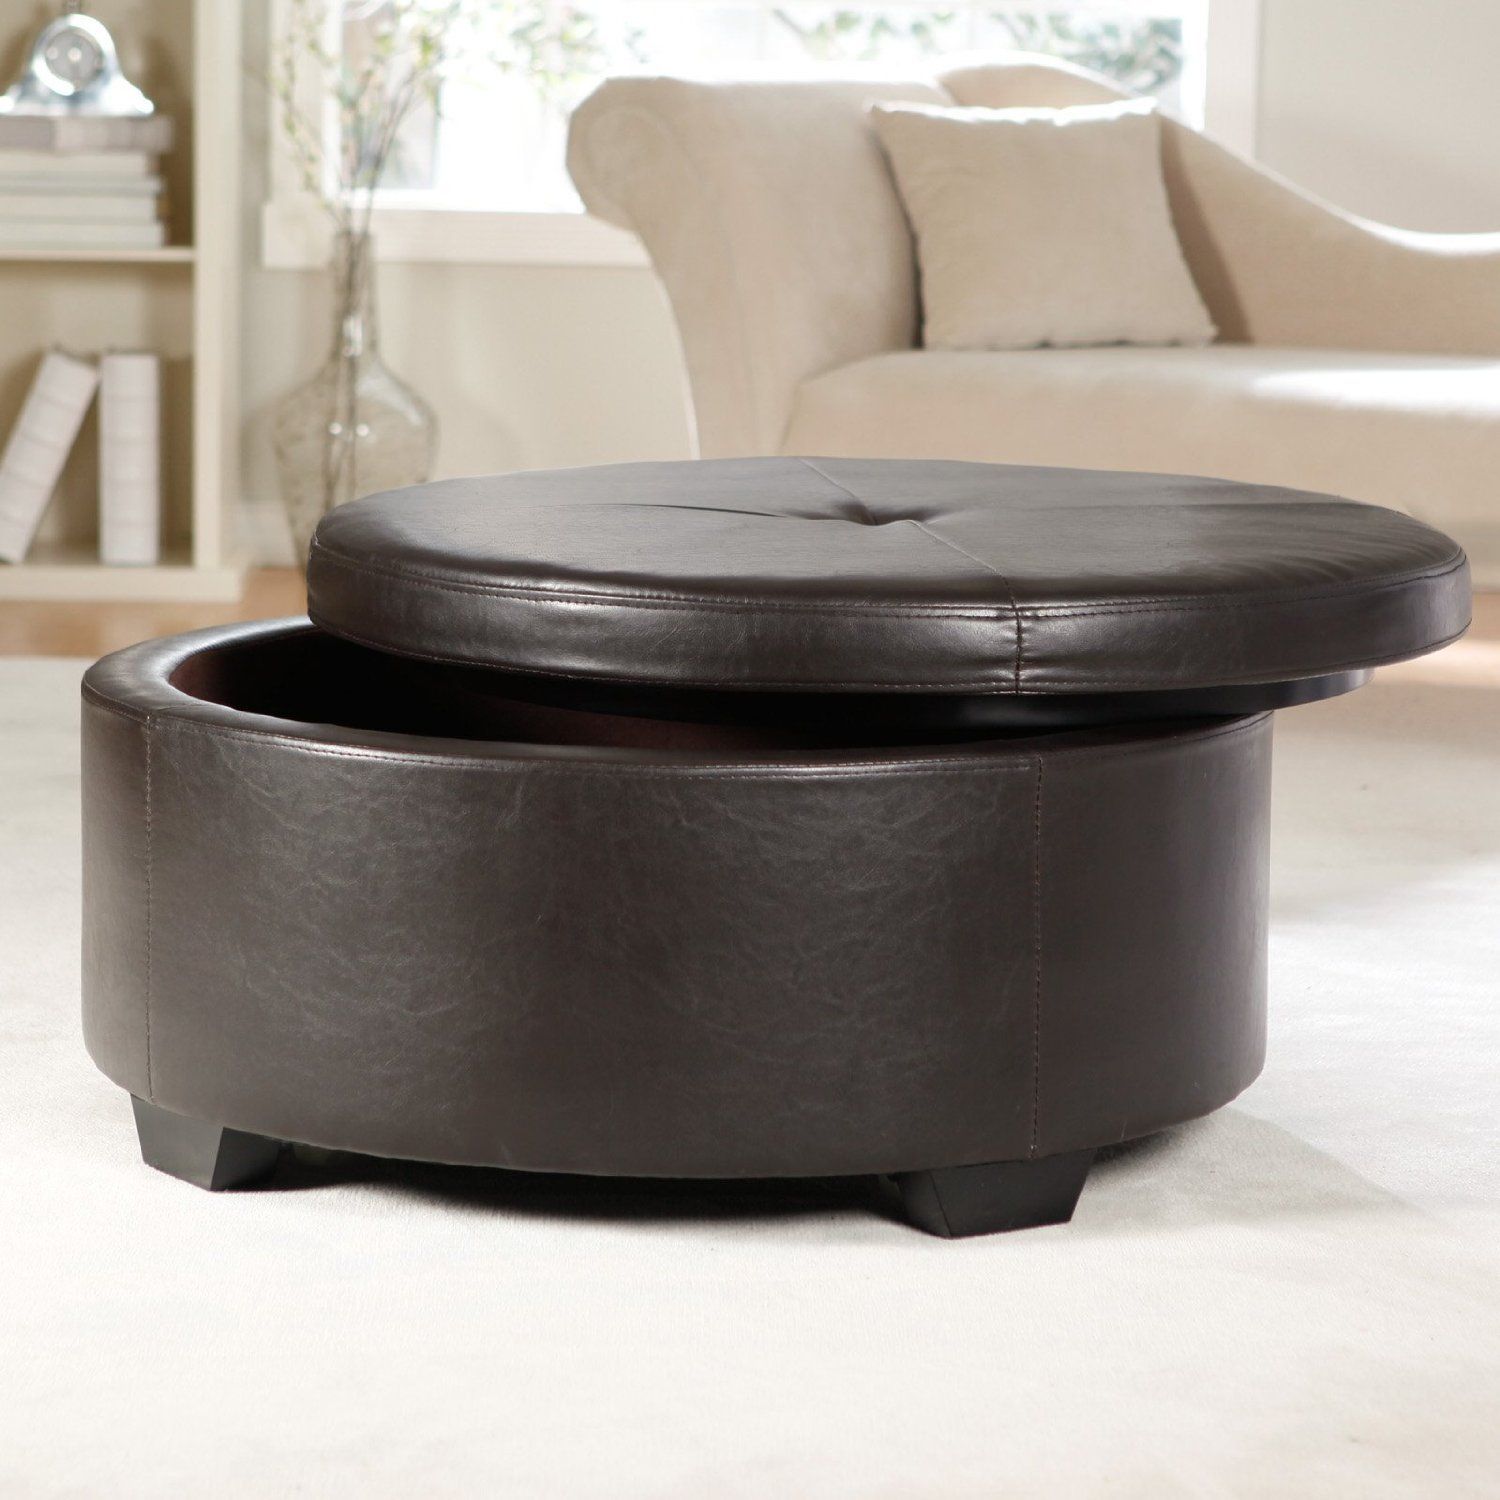 Round Leather Ottomans Coffee Tables Tufted Leather Padded Ottoman With Drawers Furniture (View 5 of 10)